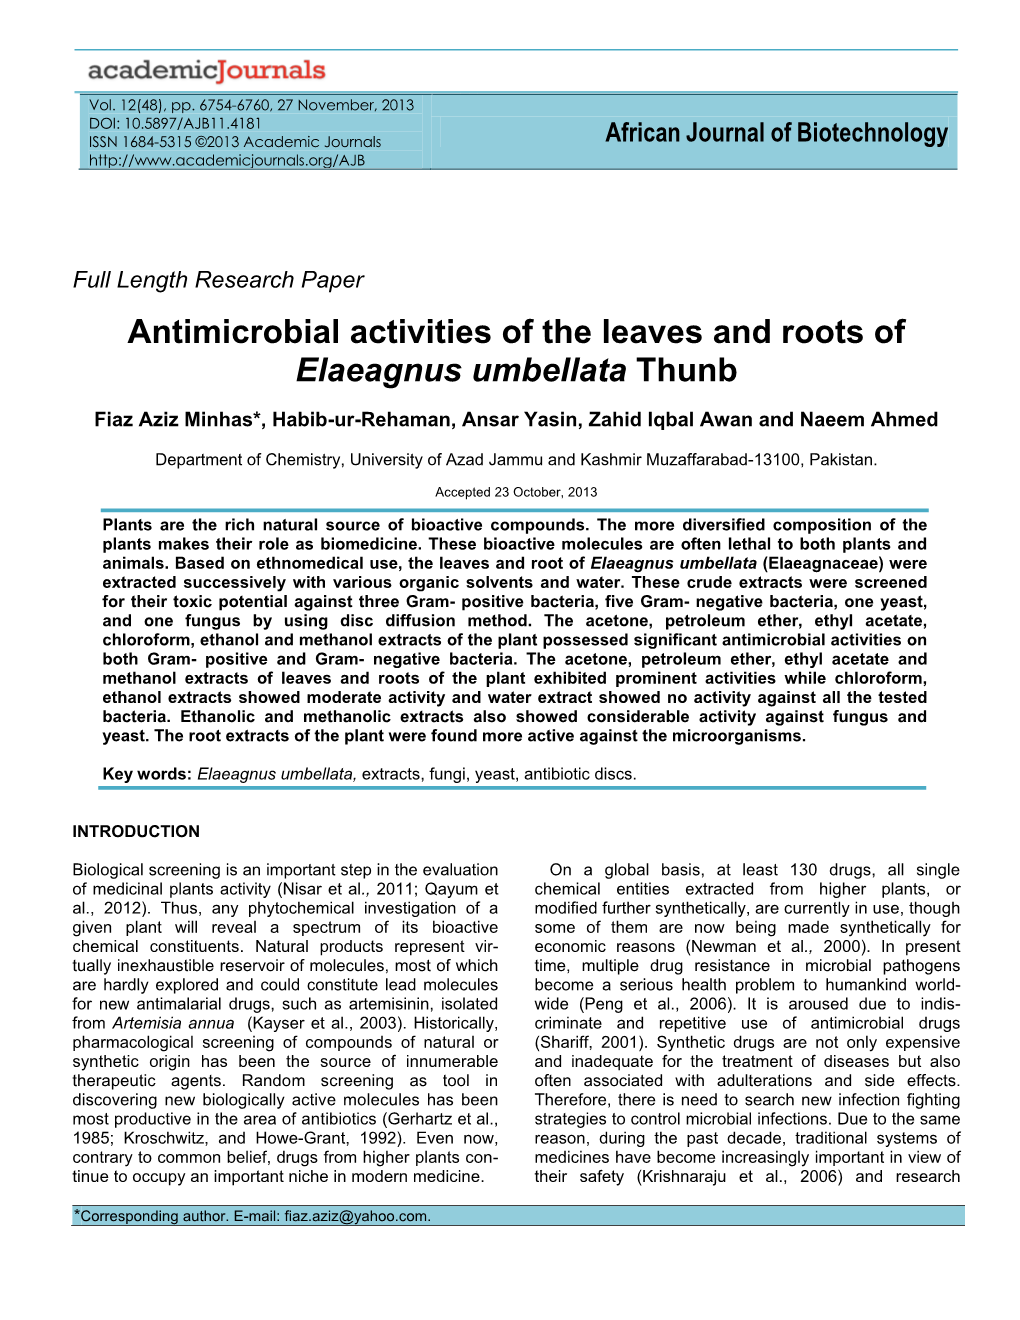 Antimicrobial Activities of the Leaves and Roots of Elaeagnus Umbellata Thunb